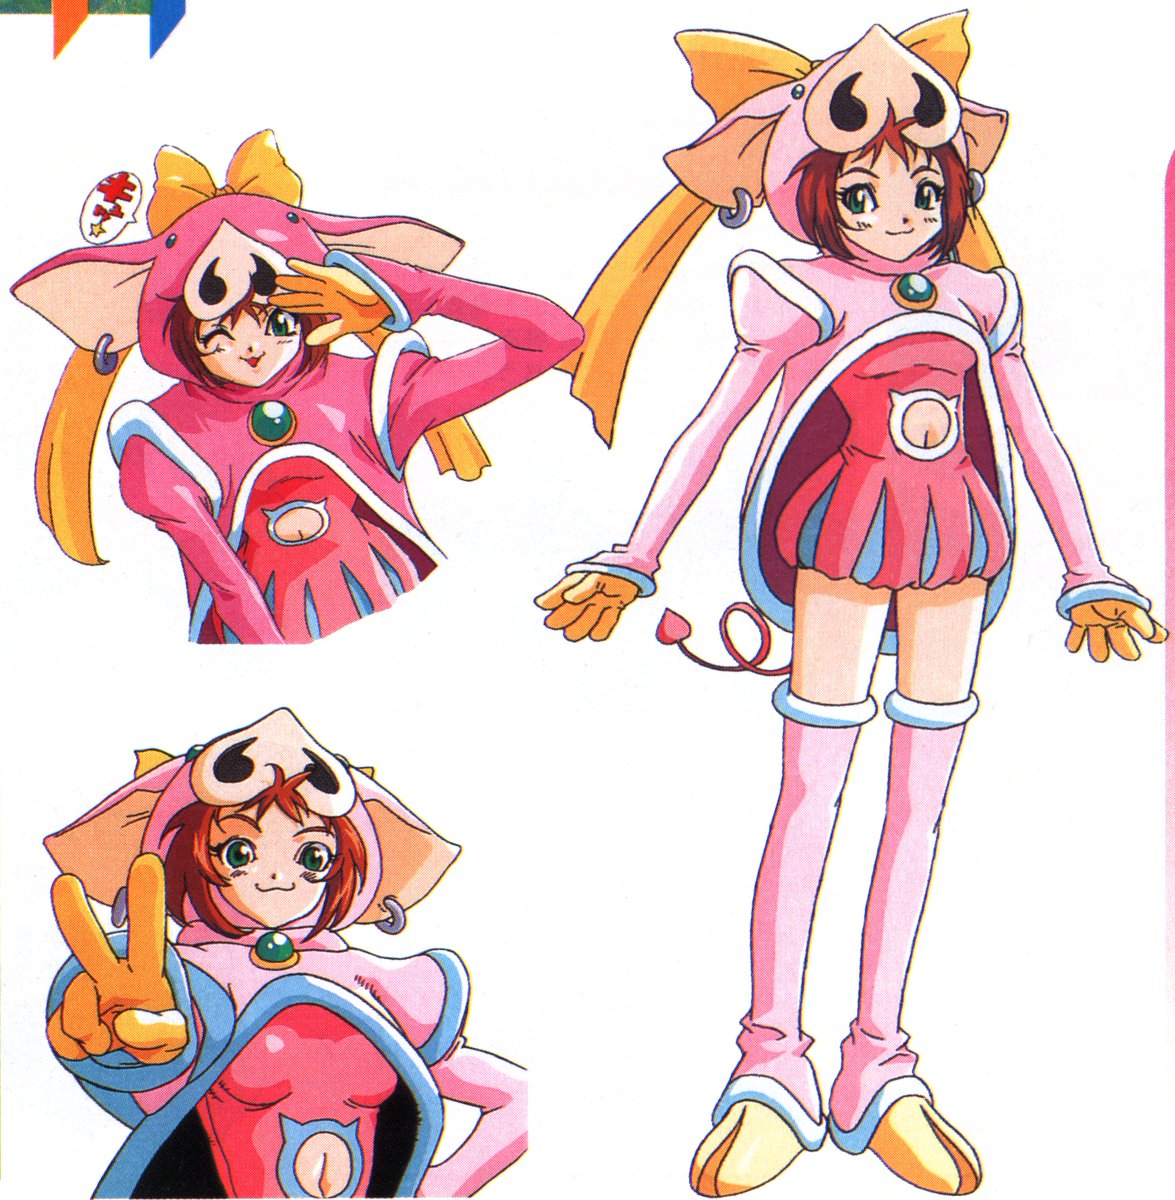 Its Fantastic Arcade Scans And Translations On Twitter Character Art For Jalecos 1997